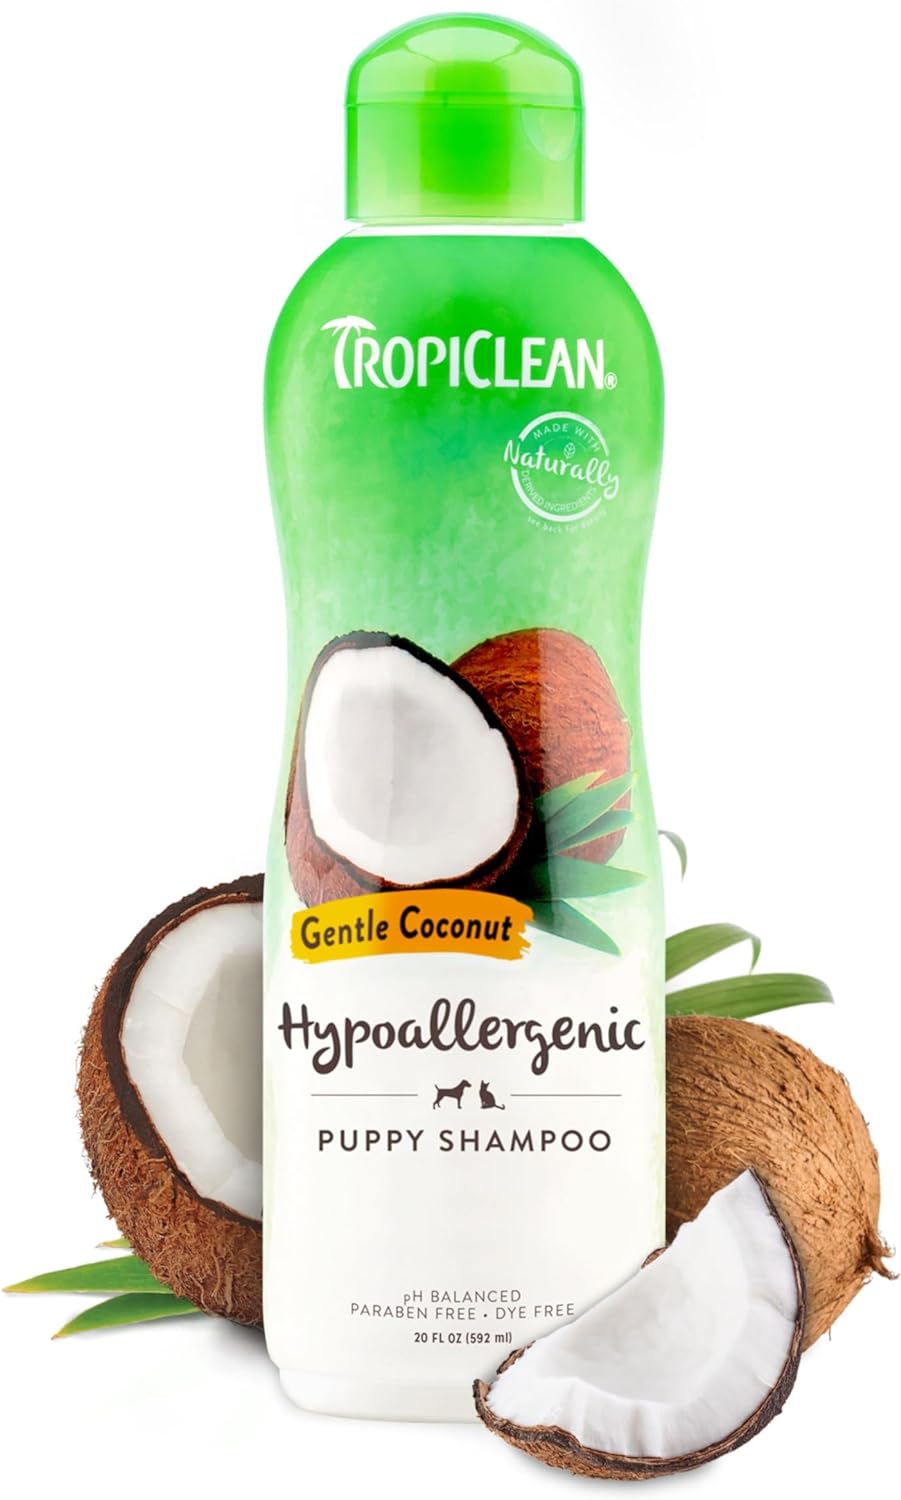 TropiClean Dog Shampoo Grooming Supplies - Hypoallergenic Puppy & Kitten Shampoo Gentle Cleansing for Sensitive Skin - Derived from Natural Ingredients - Used by Groomers - Gentle Coconut, 355ml?TRGNSH12Z